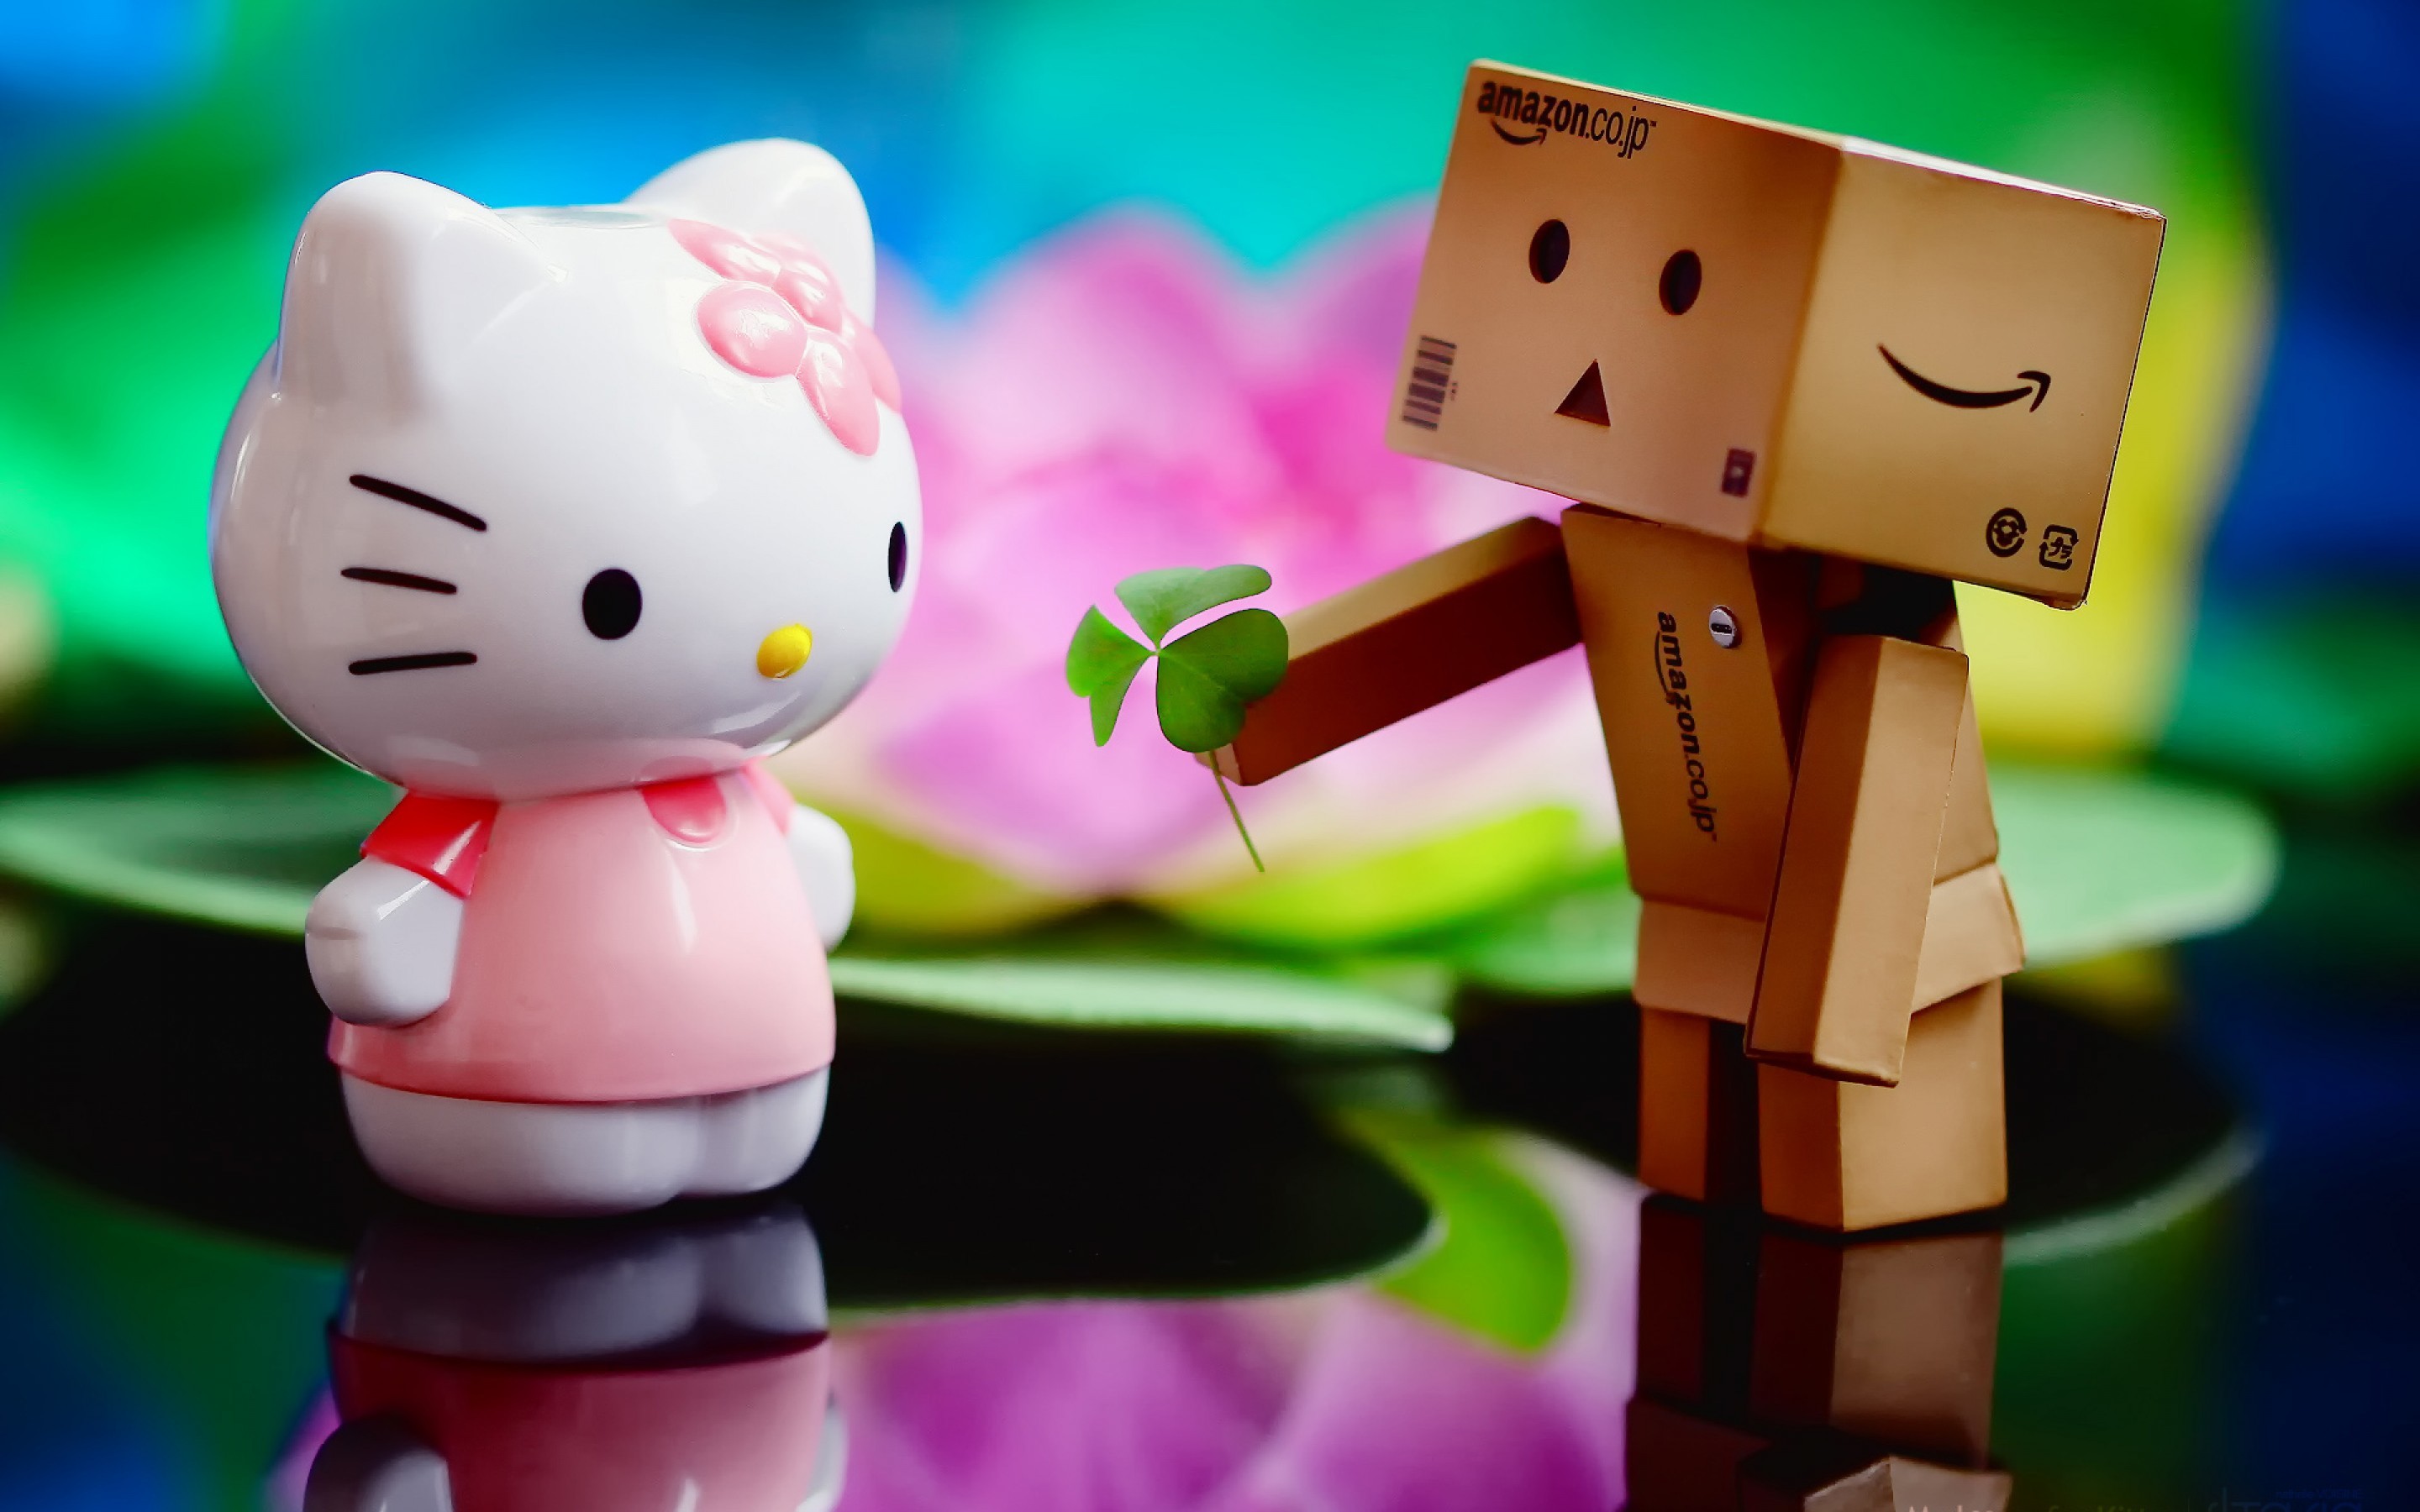 2880x1800 Find and download thousands of Cute Backgrounds from all over the world.